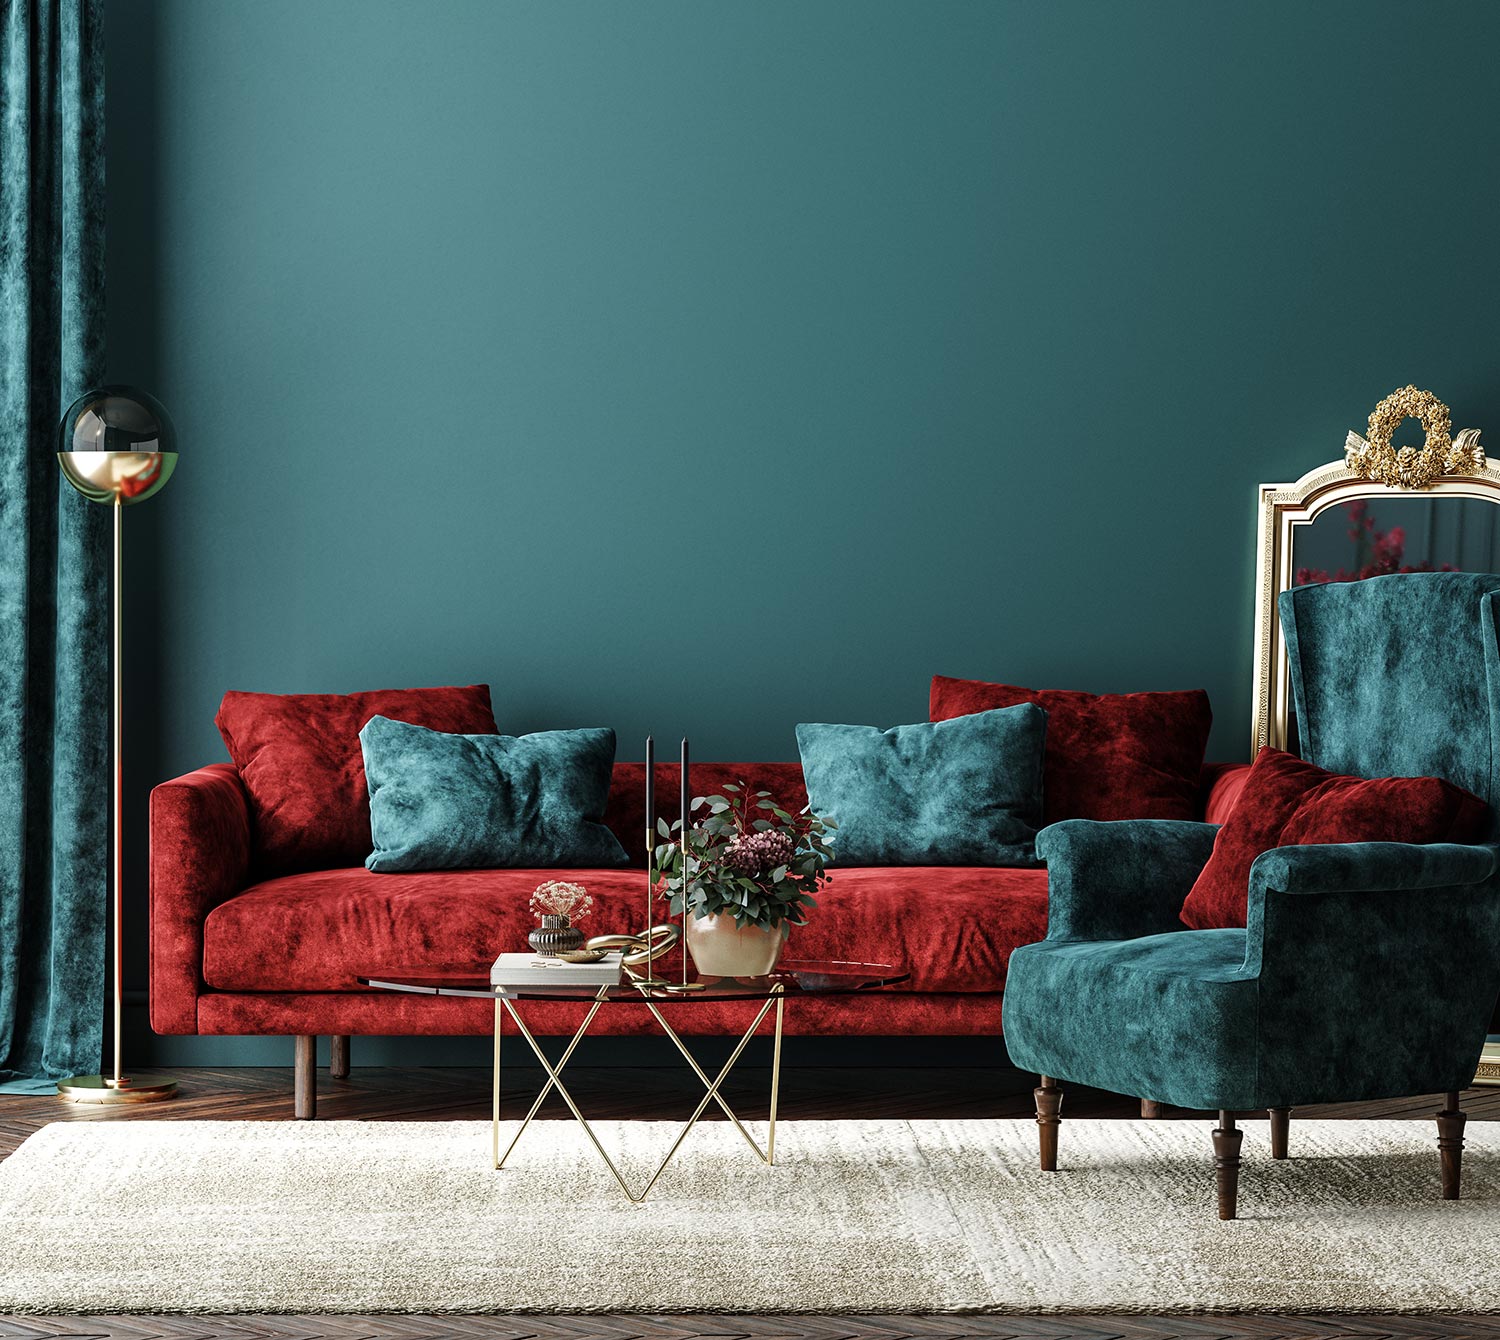 Home interior mock-up with red sofa, table and decor in green living room